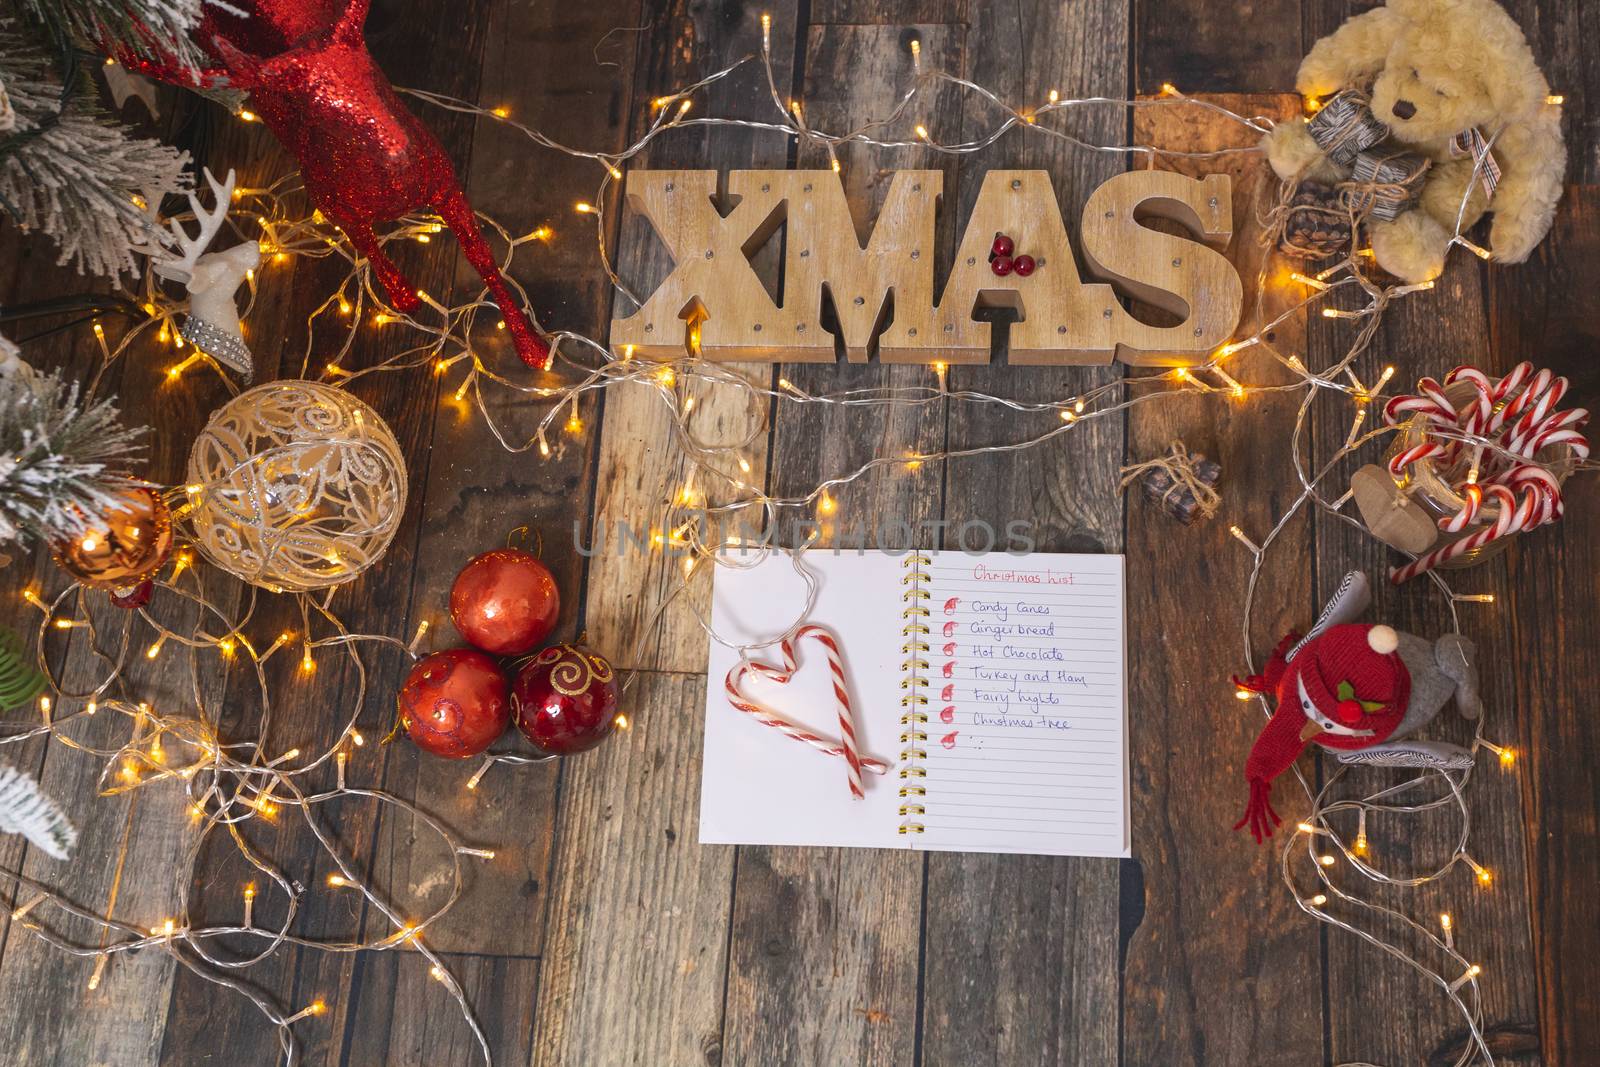 Christmas list on rustic wood with Christmas decorations.  Add your own message or list